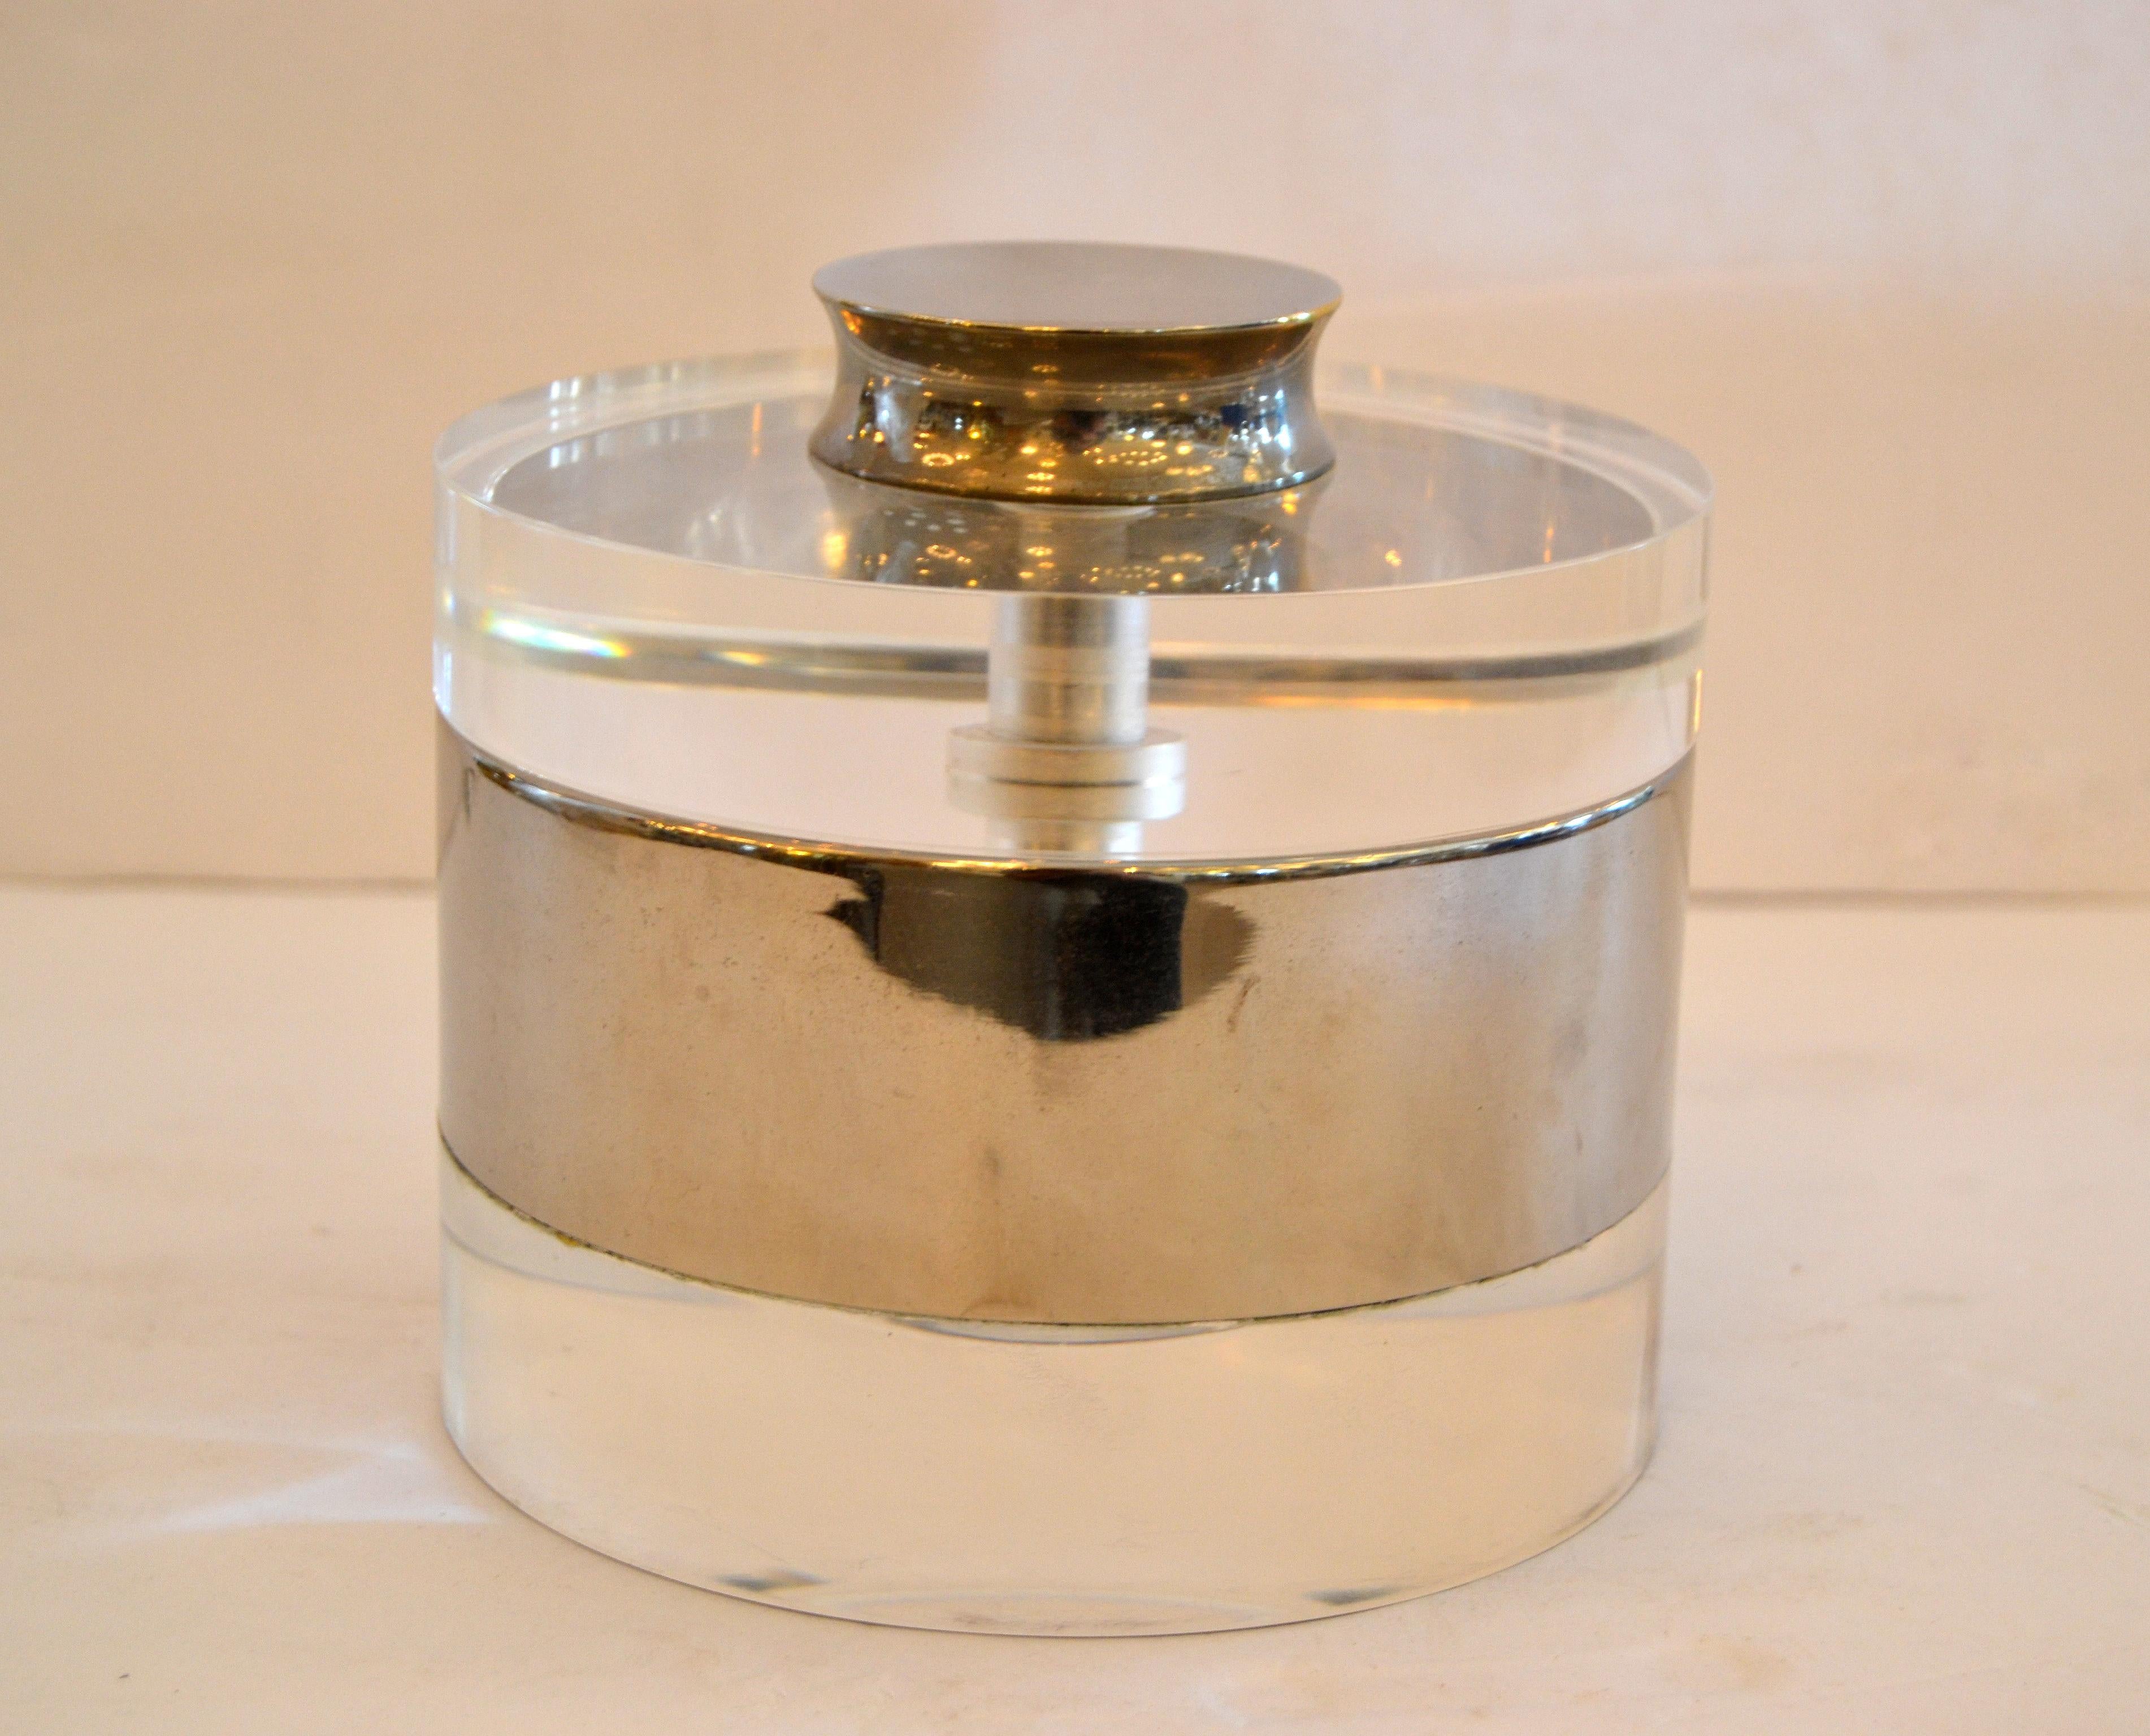 Mid-Century Modern Lucite and chrome ice bucket or candy dish.
The Lucite is thick and very well crafted.
Condition note: Some sporadic crackling in the Lucite, especially to the inside of the bottom.